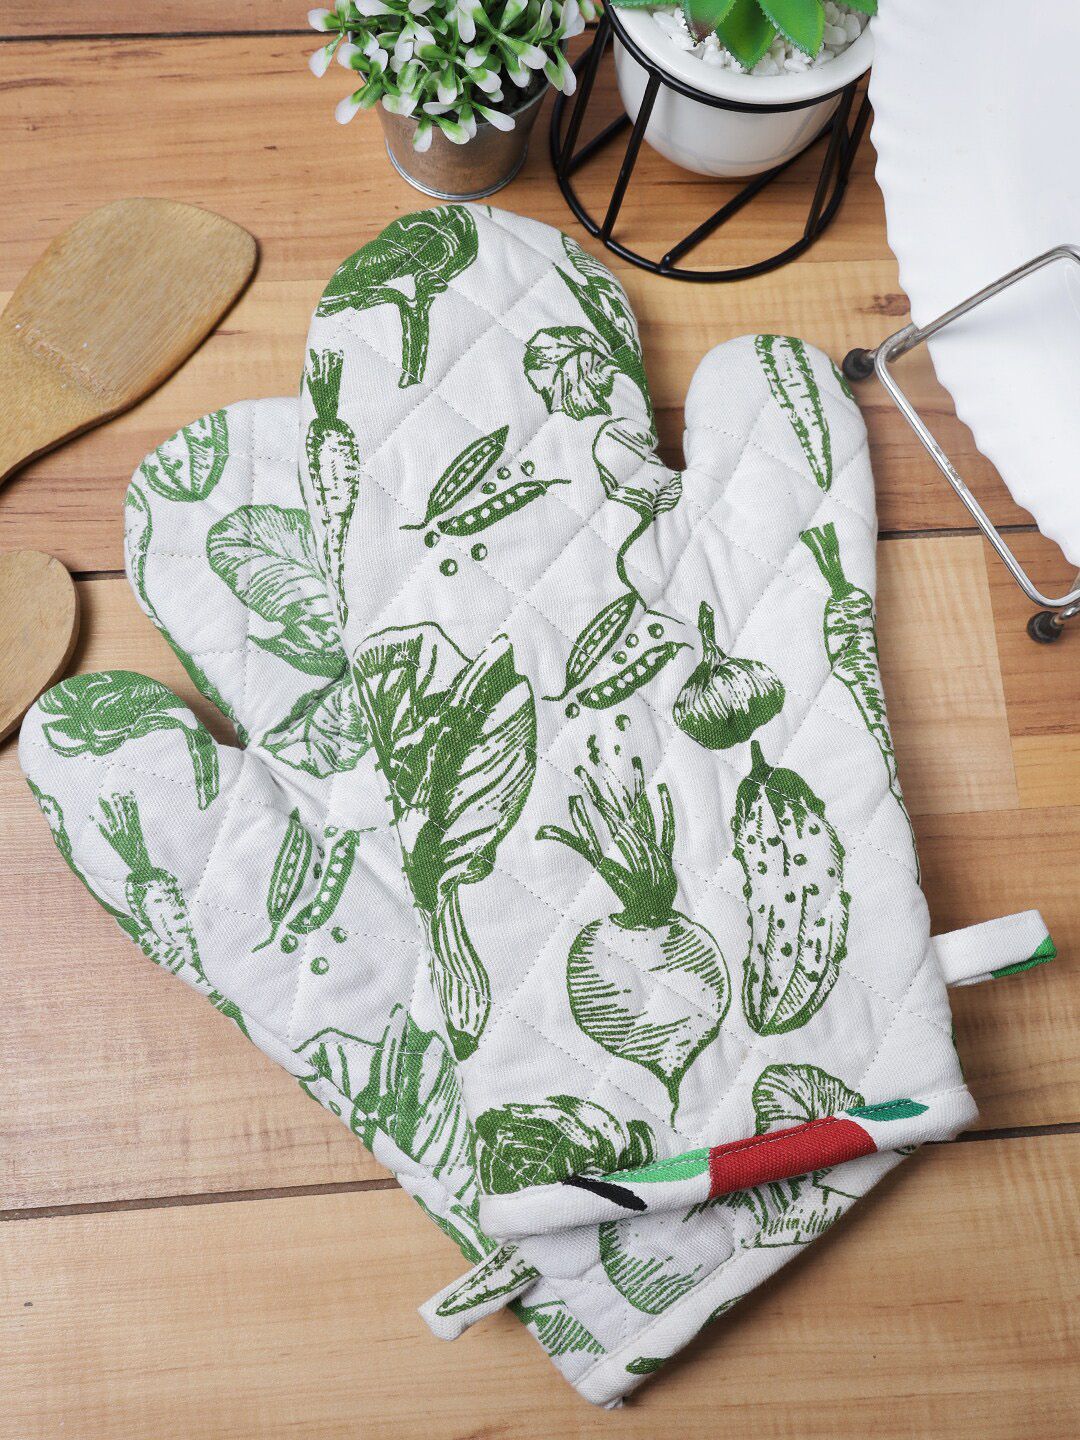 Soumya Set of 2 Green & White Printed Cotton Oven Glove Price in India